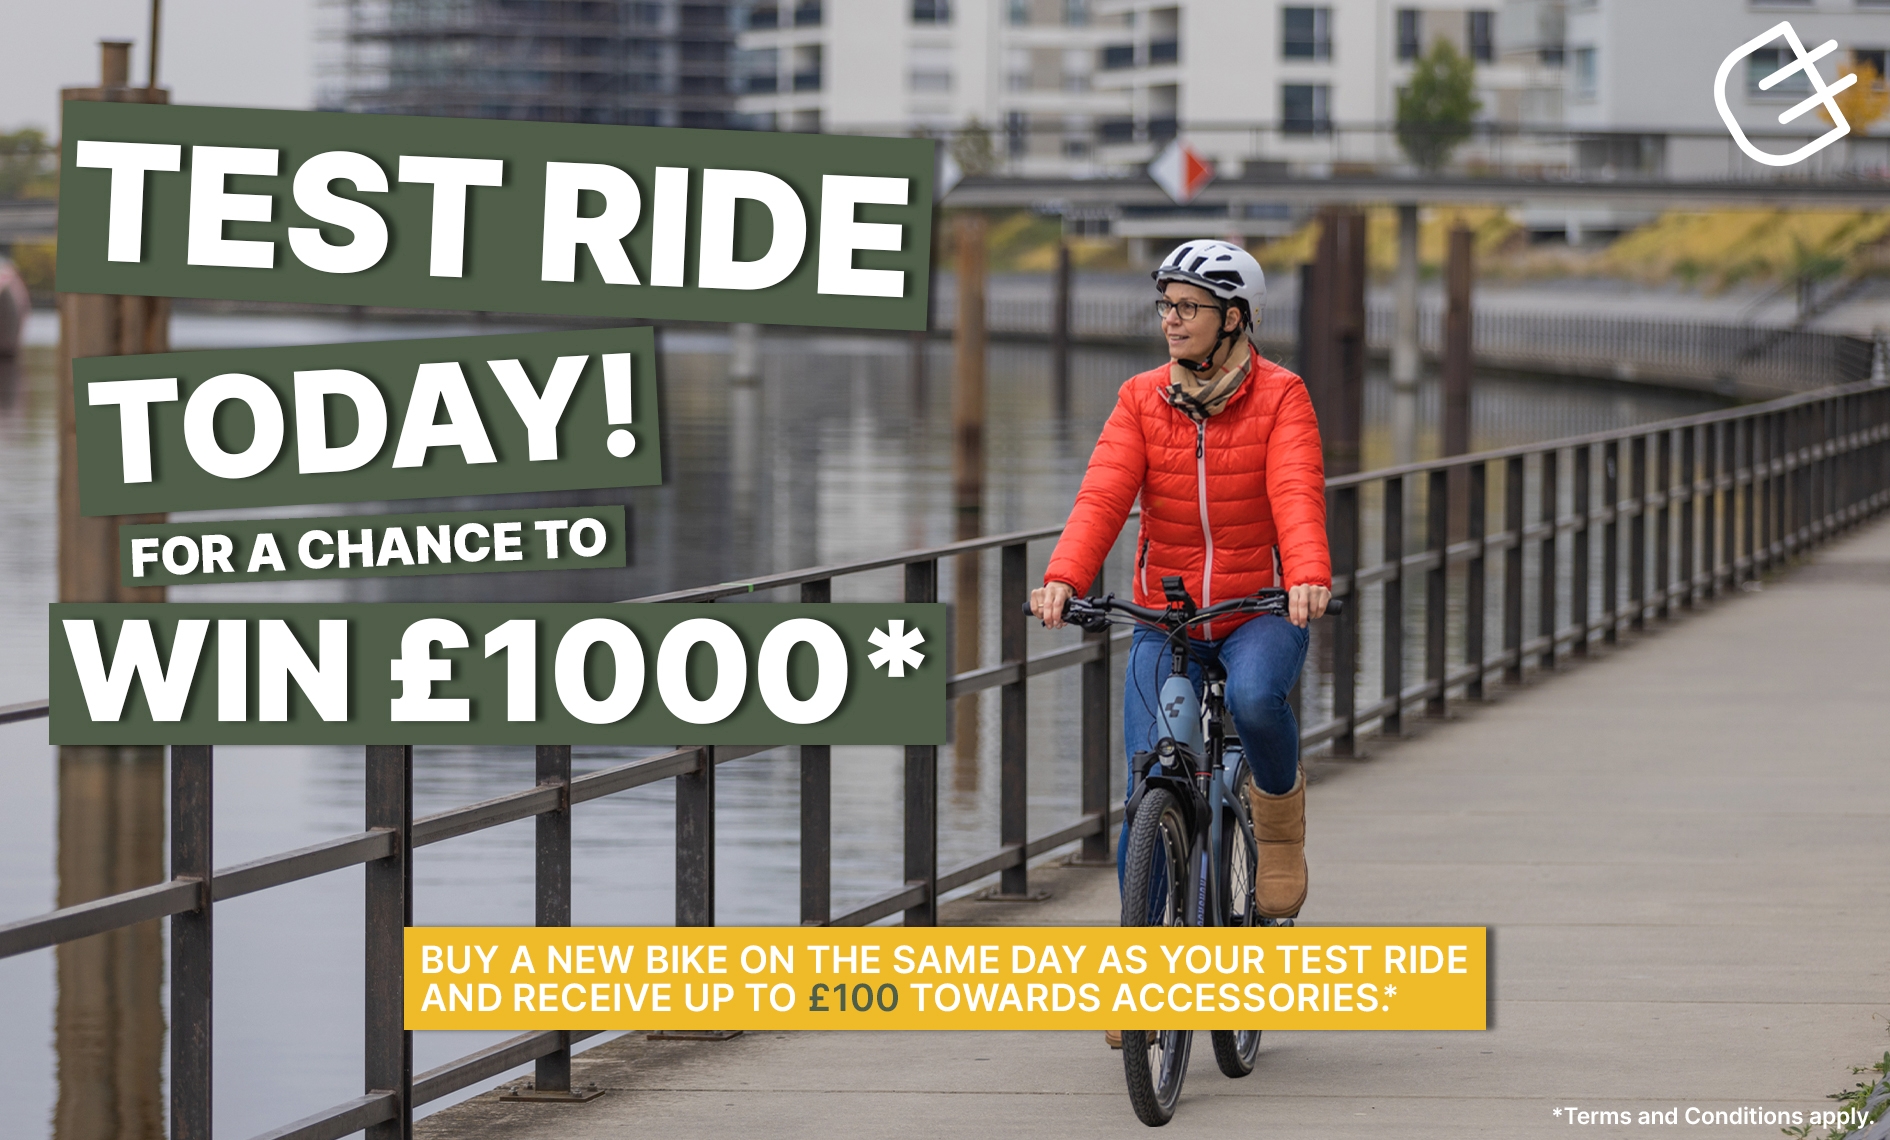 Test ride today for a chance to WIN £1000* and buy a new bike on the same day as your test ride and receive up to £100 towards accessories.